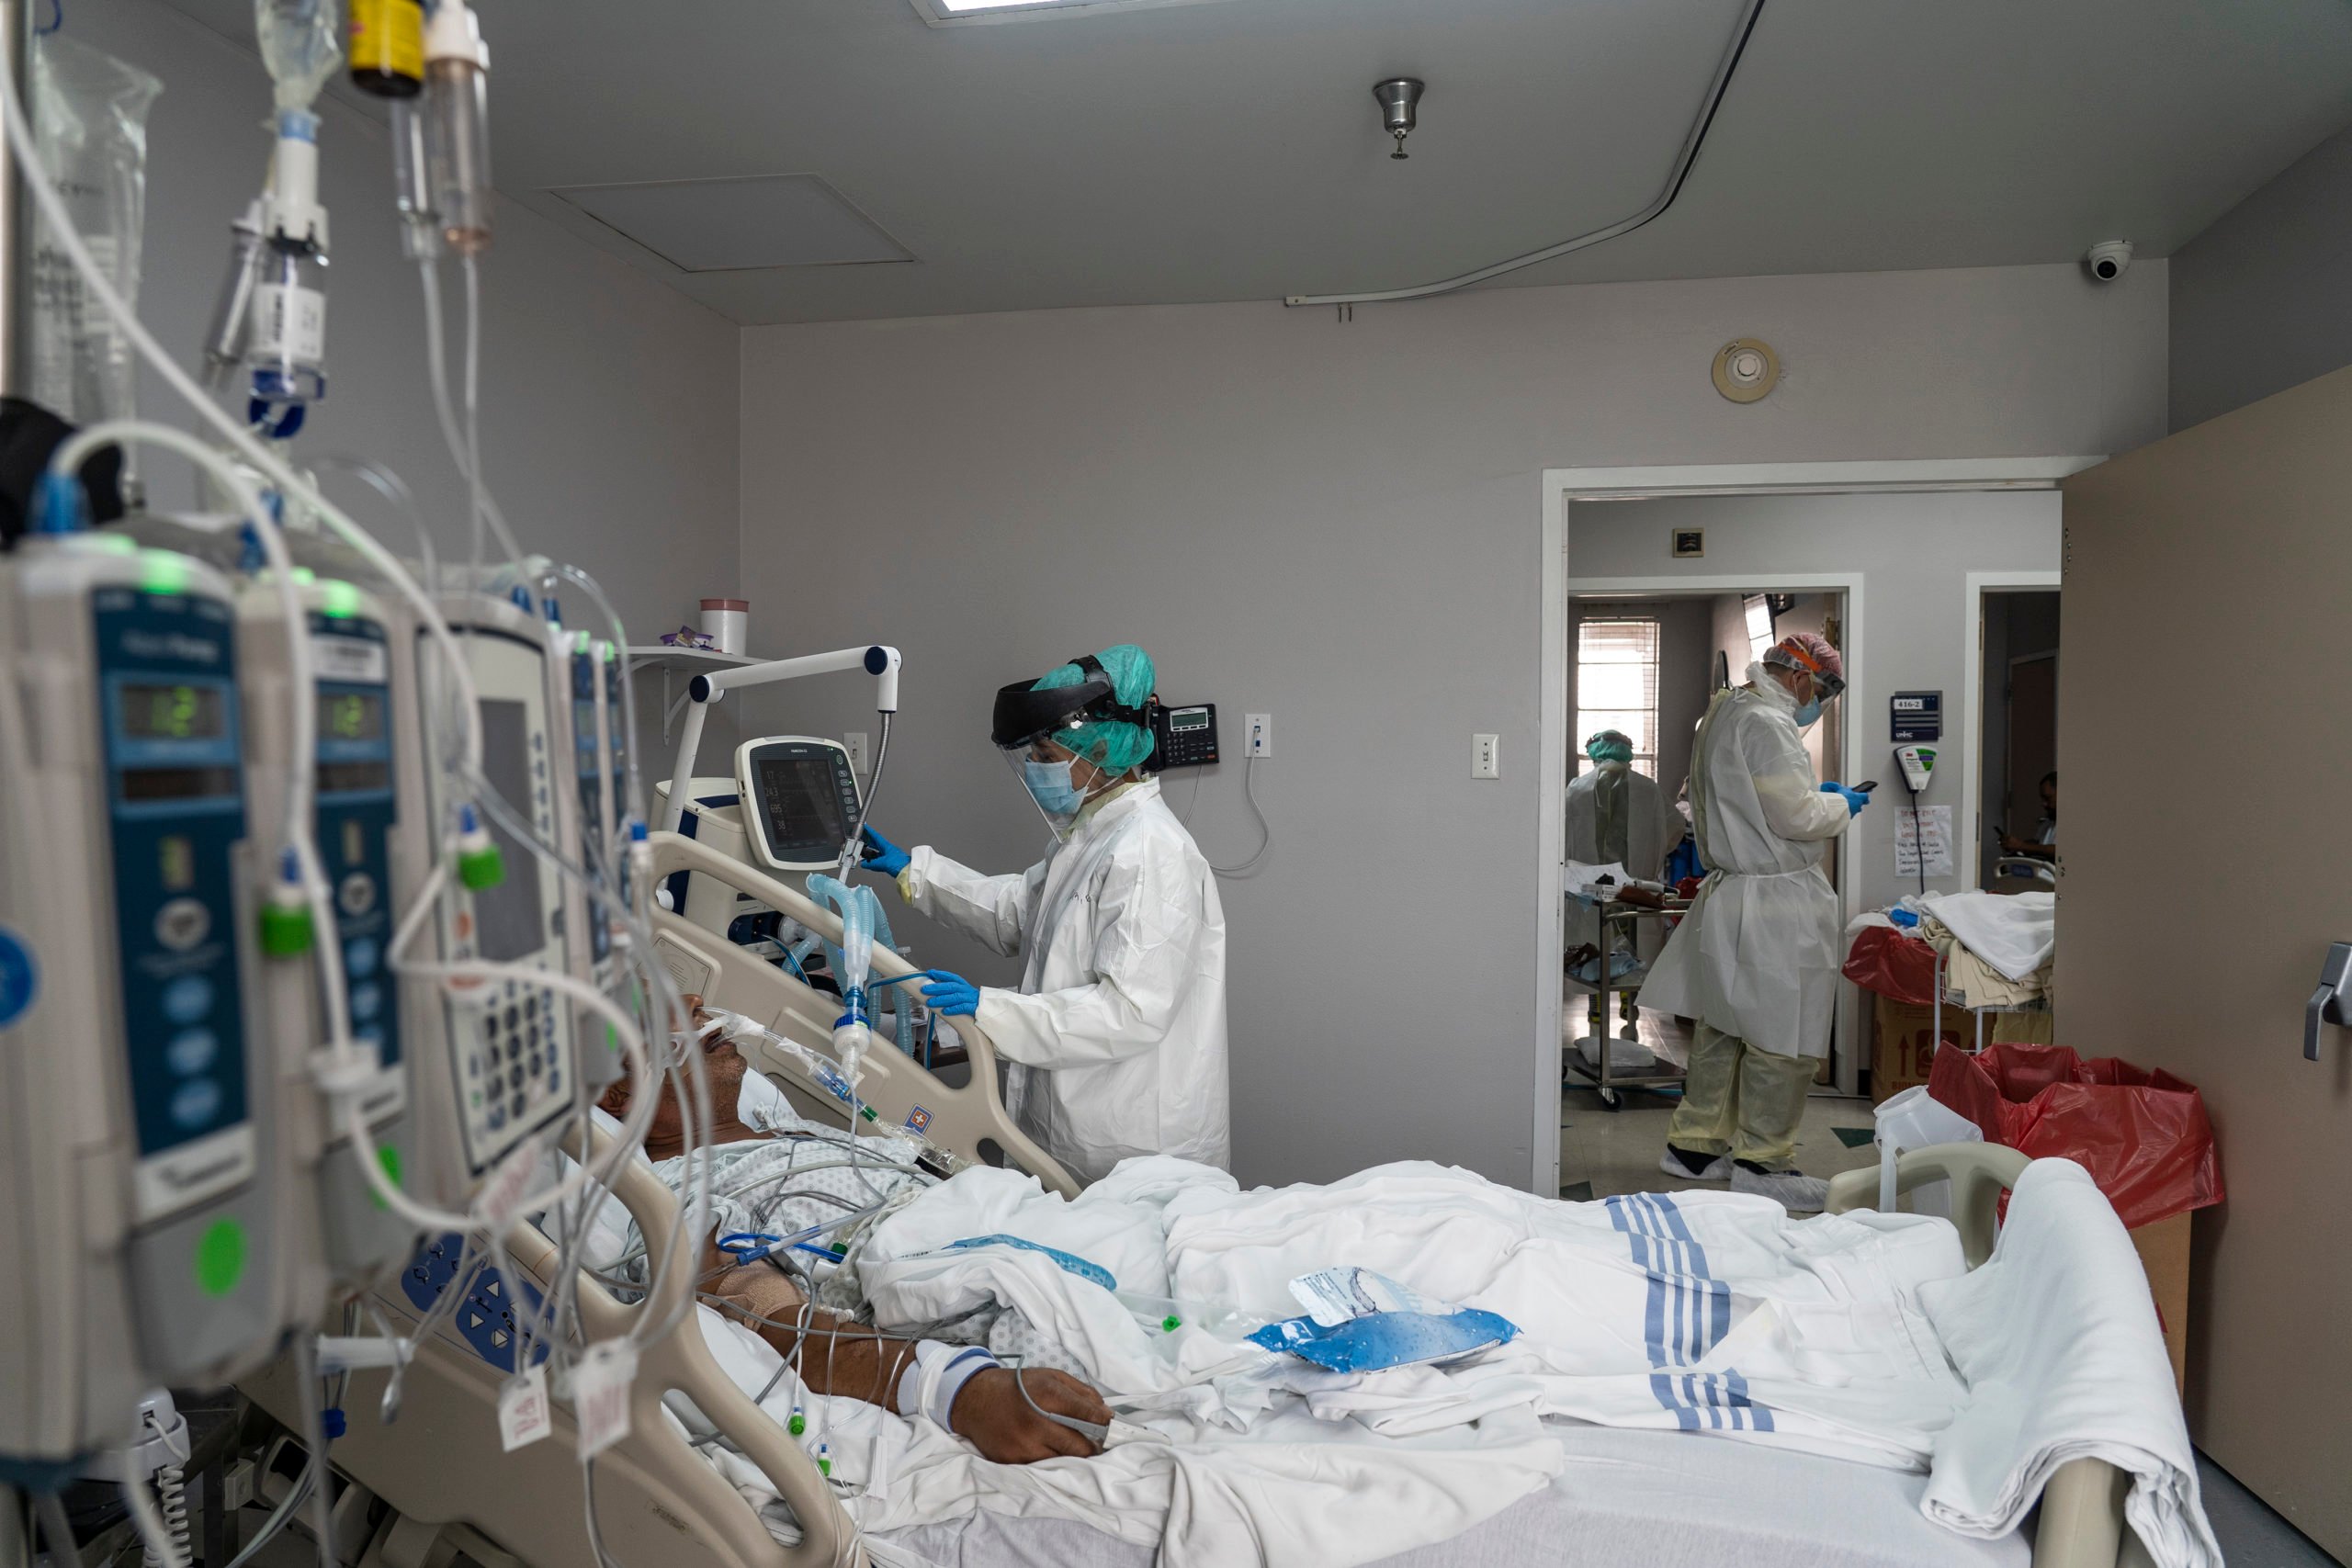 HOUSTON, TX - JUNE 30: (EDITORIAL USE ONLY) A member of the medical staff wearing full PPE treats a patient in the Covid-19 intensive care unit at the United Memorial Medical Center on June 30, 2020 in Houston, Texas. Covid-19 cases and hospitalizations have spiked since Texas reopened, pushing intensive-care wards to full capacity and sparking concerns about a surge in fatalities as the virus spreads. (Photo by Go Nakamura/Getty Images)